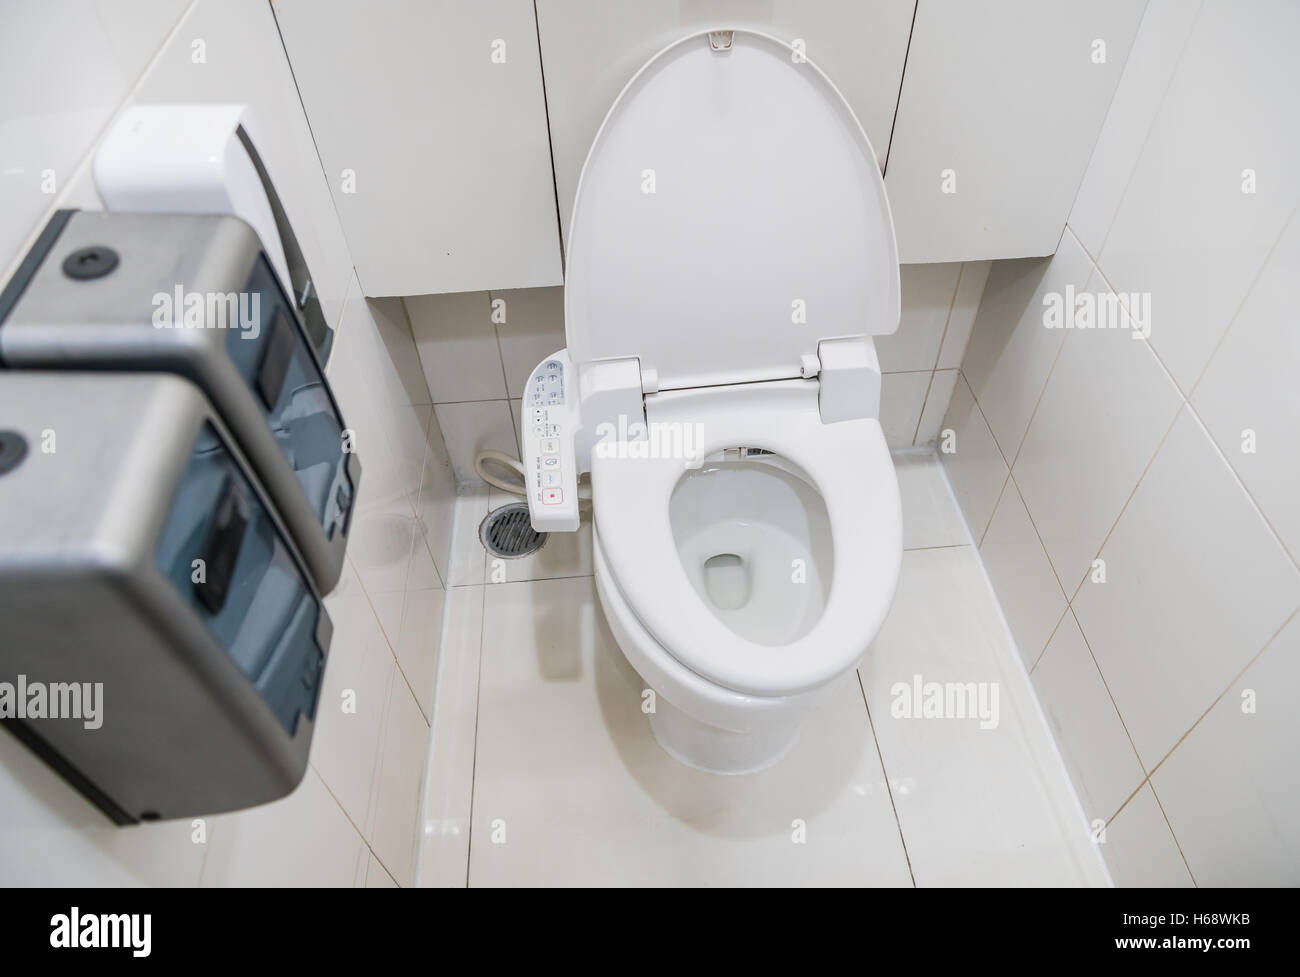 toilet with electronic seat automatic flush Stock Photo